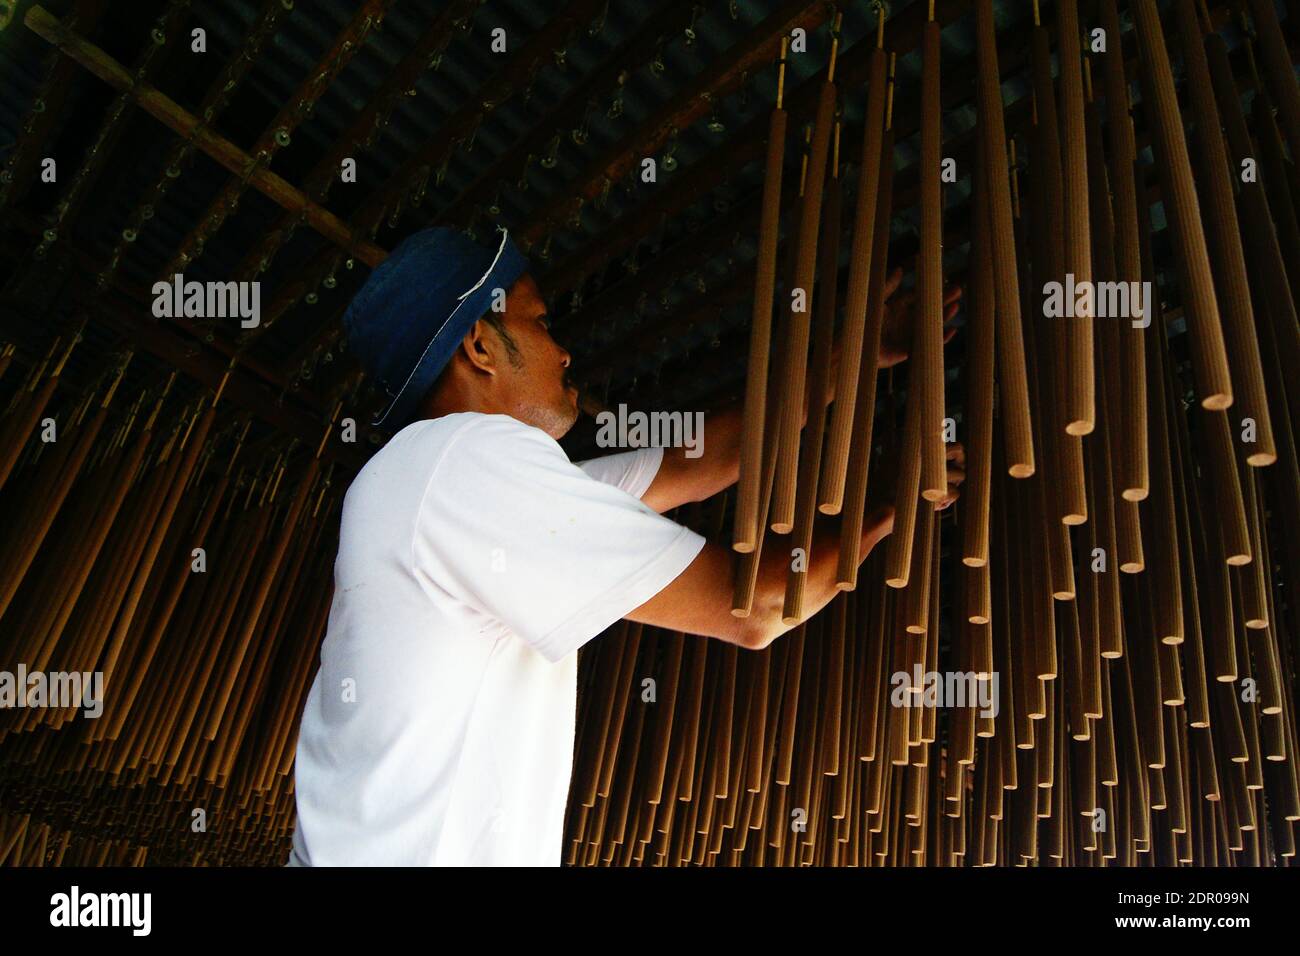 Low Angle View Of Man By Incense Sticks Stock Photo